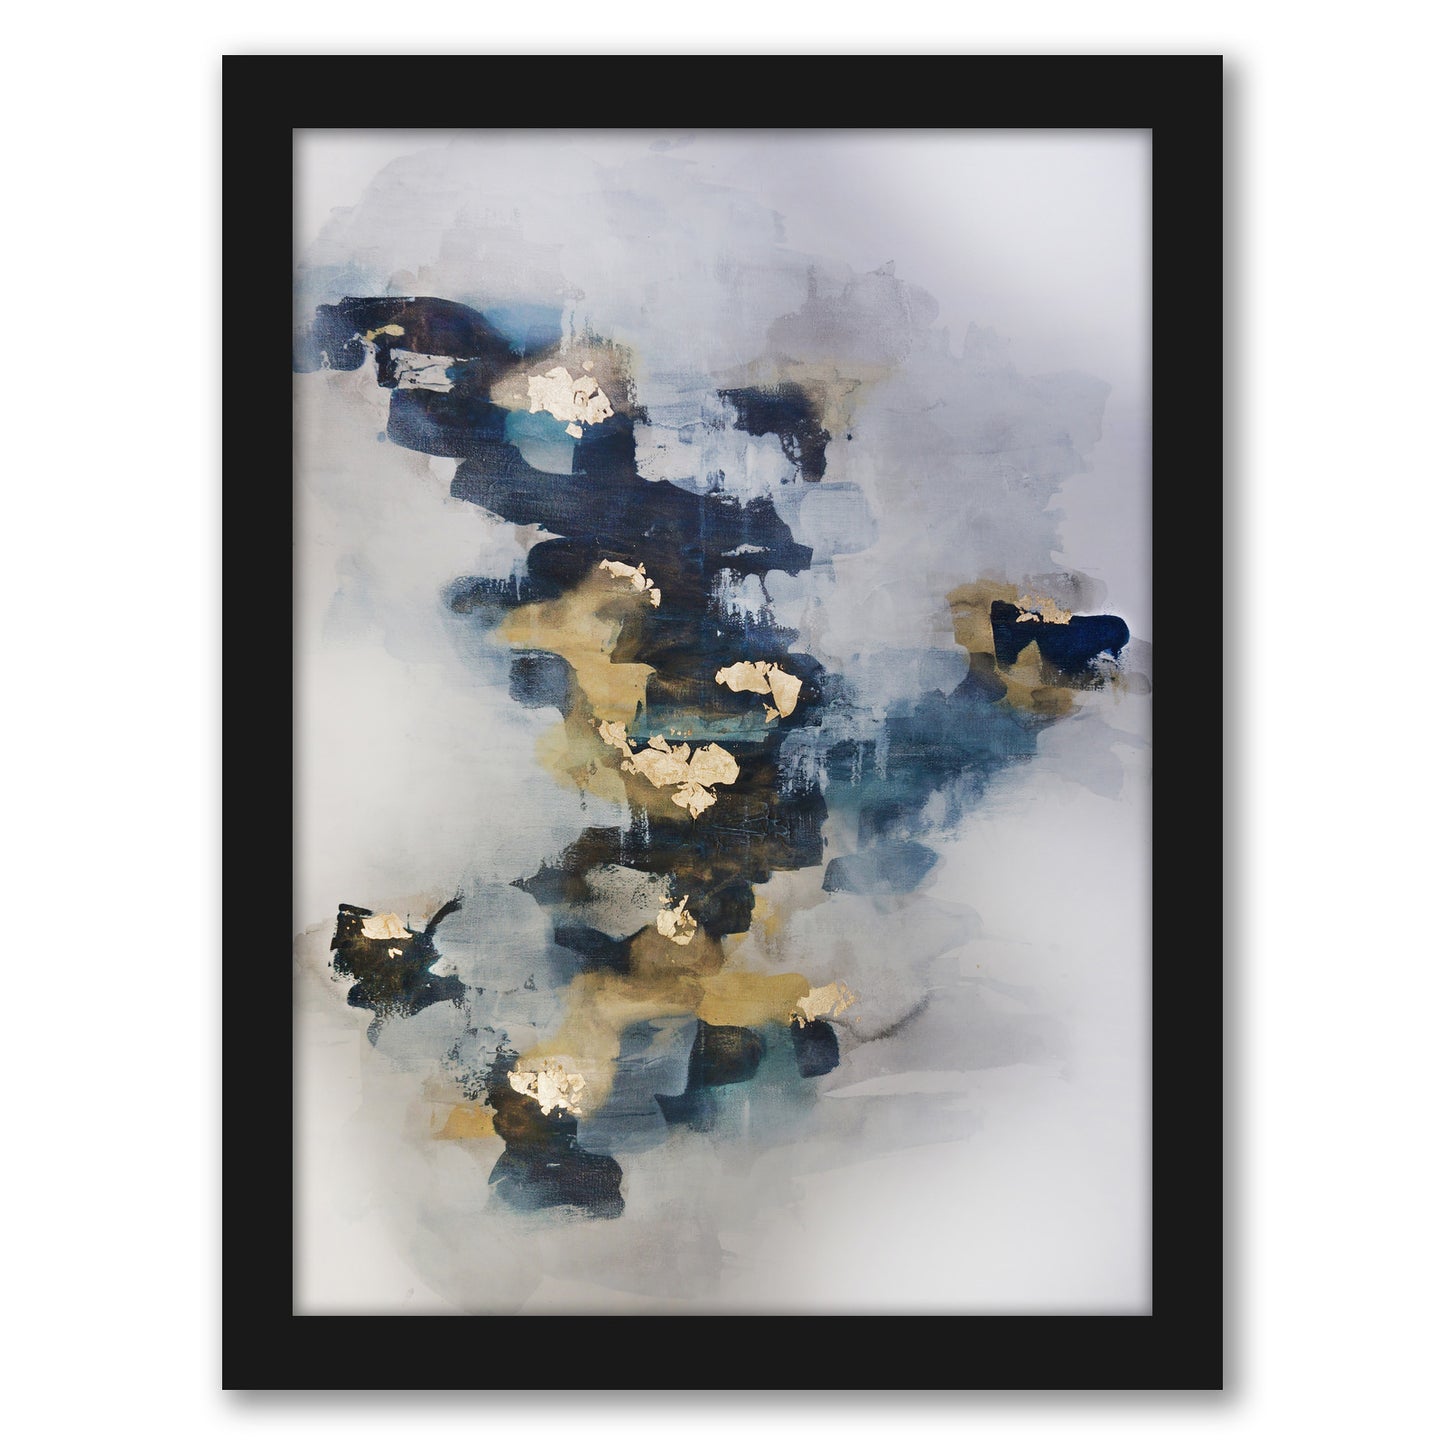 Commitment by Christine Olmstead - Framed Print